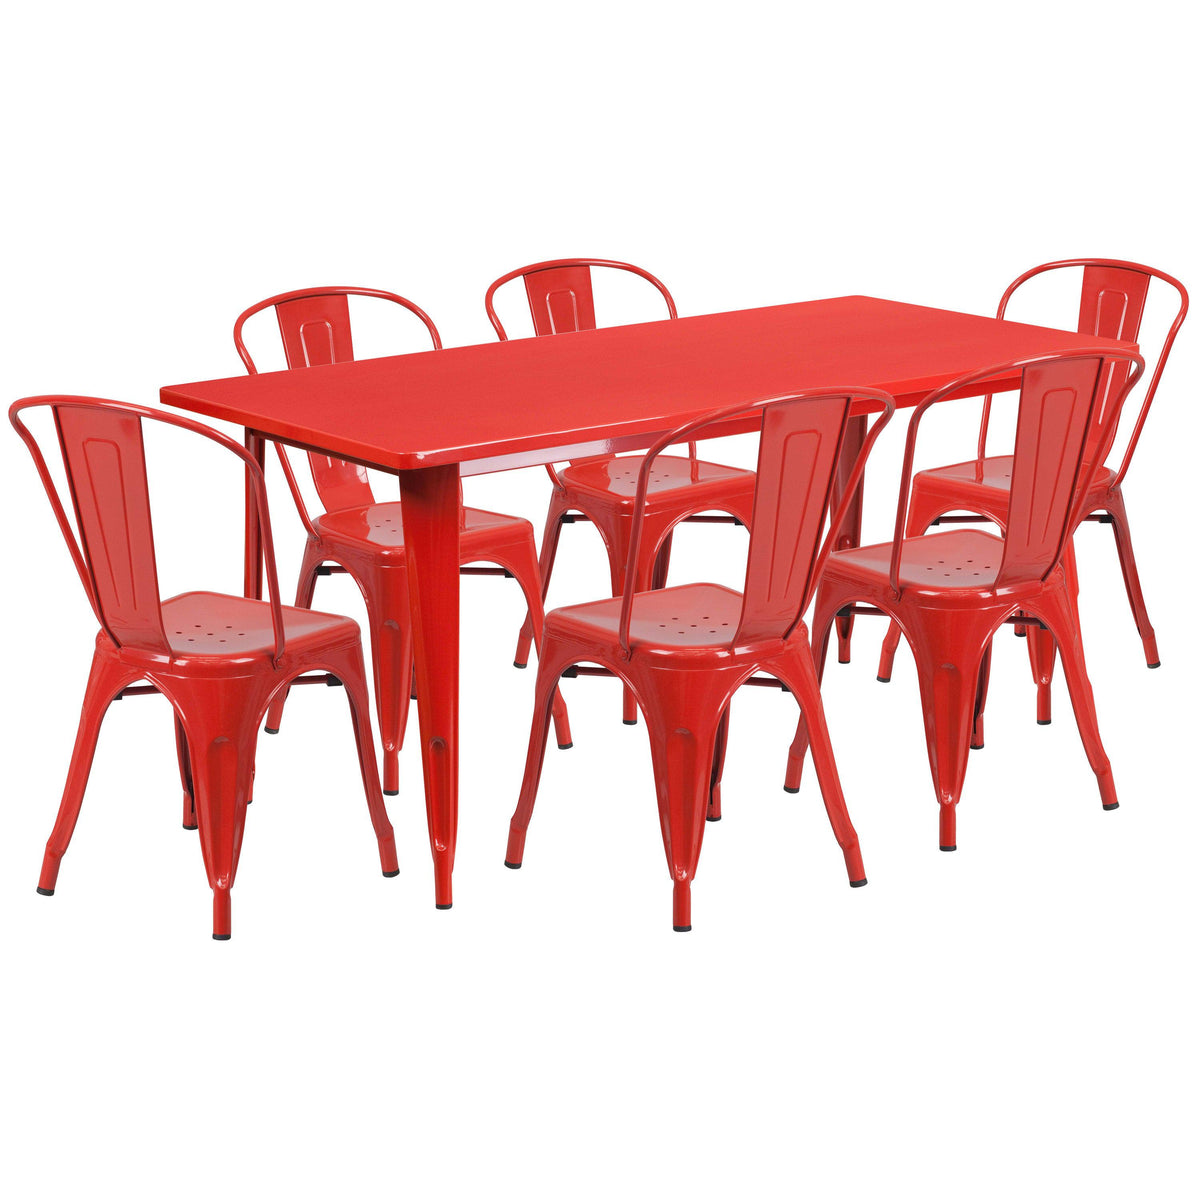 Red |#| 31.5inch x 63inch Rectangular Red Metal Indoor-Outdoor Table Set with 6 Stack Chairs